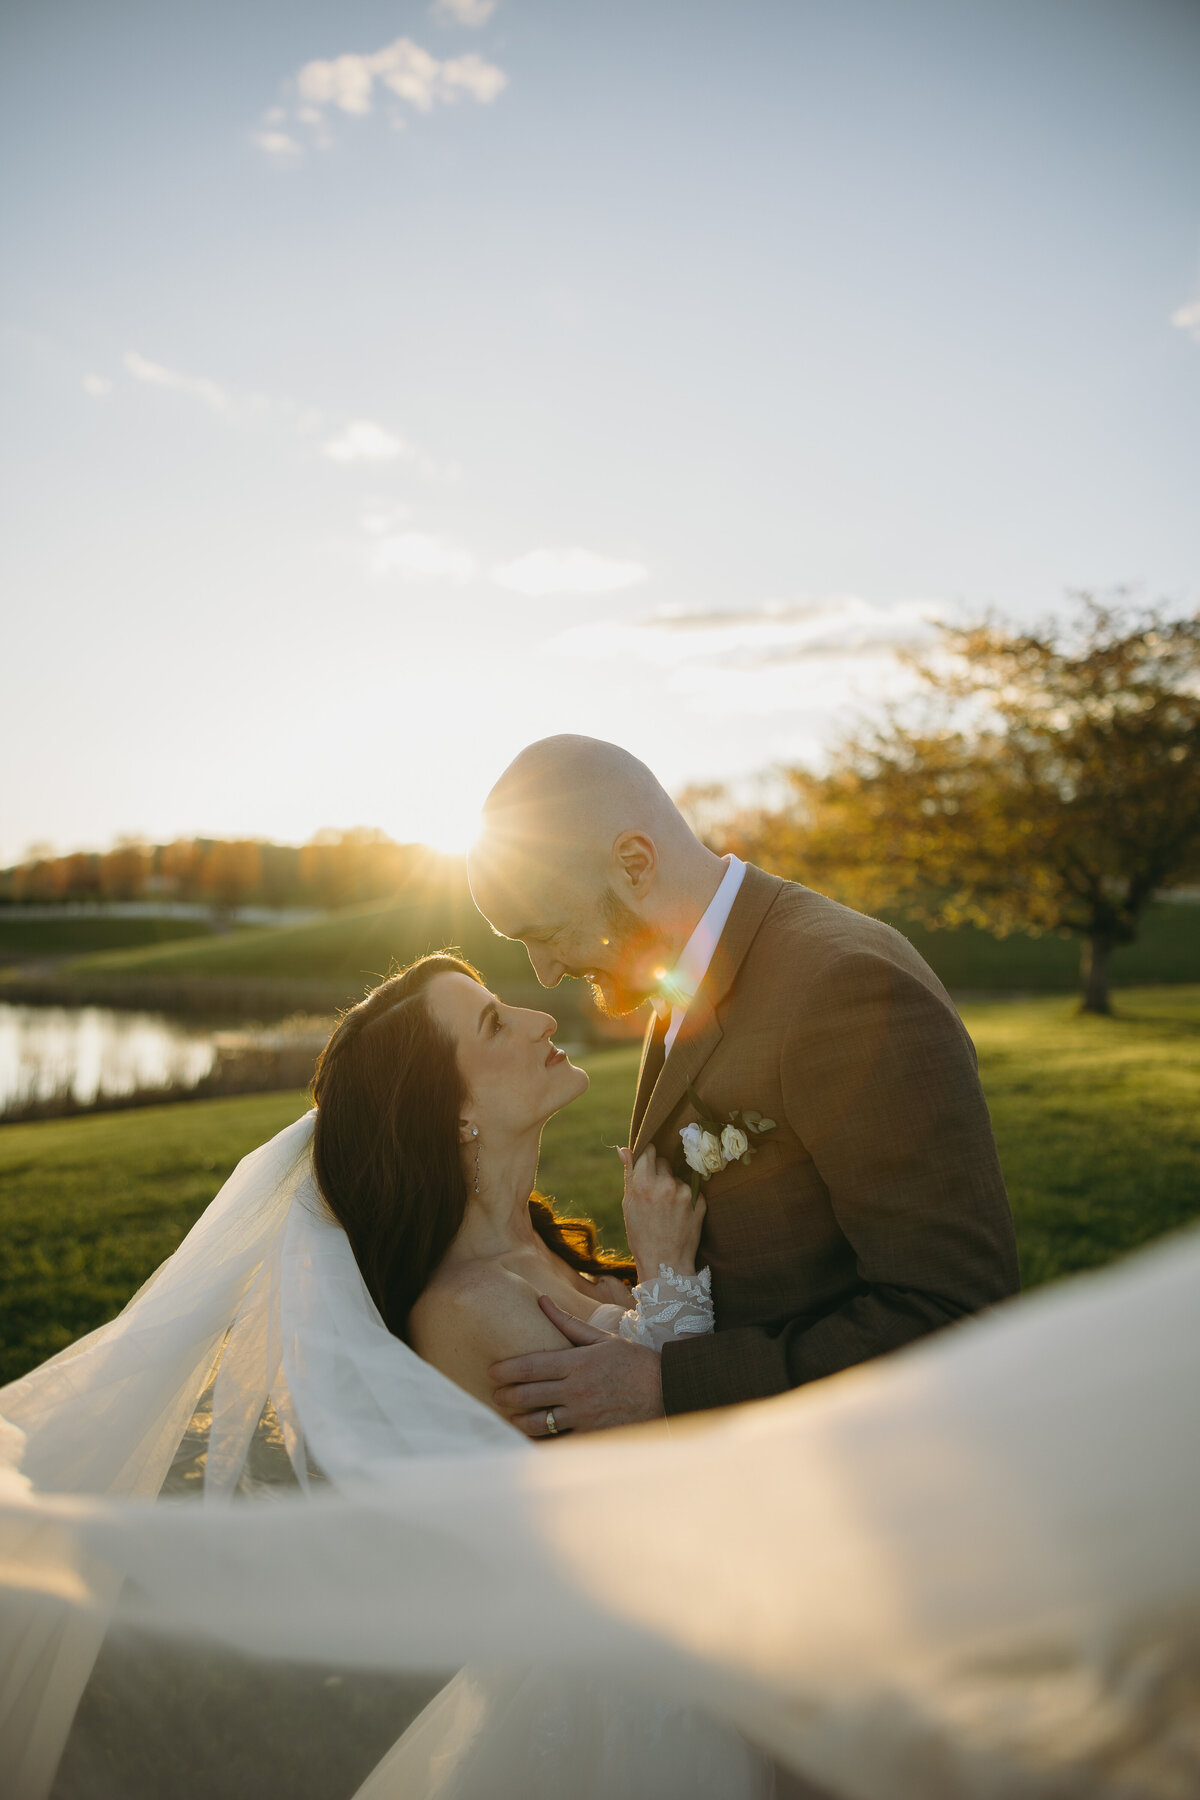 TennesseeManor Wedding in Knoxville. Dana Photo Co. Inquire now